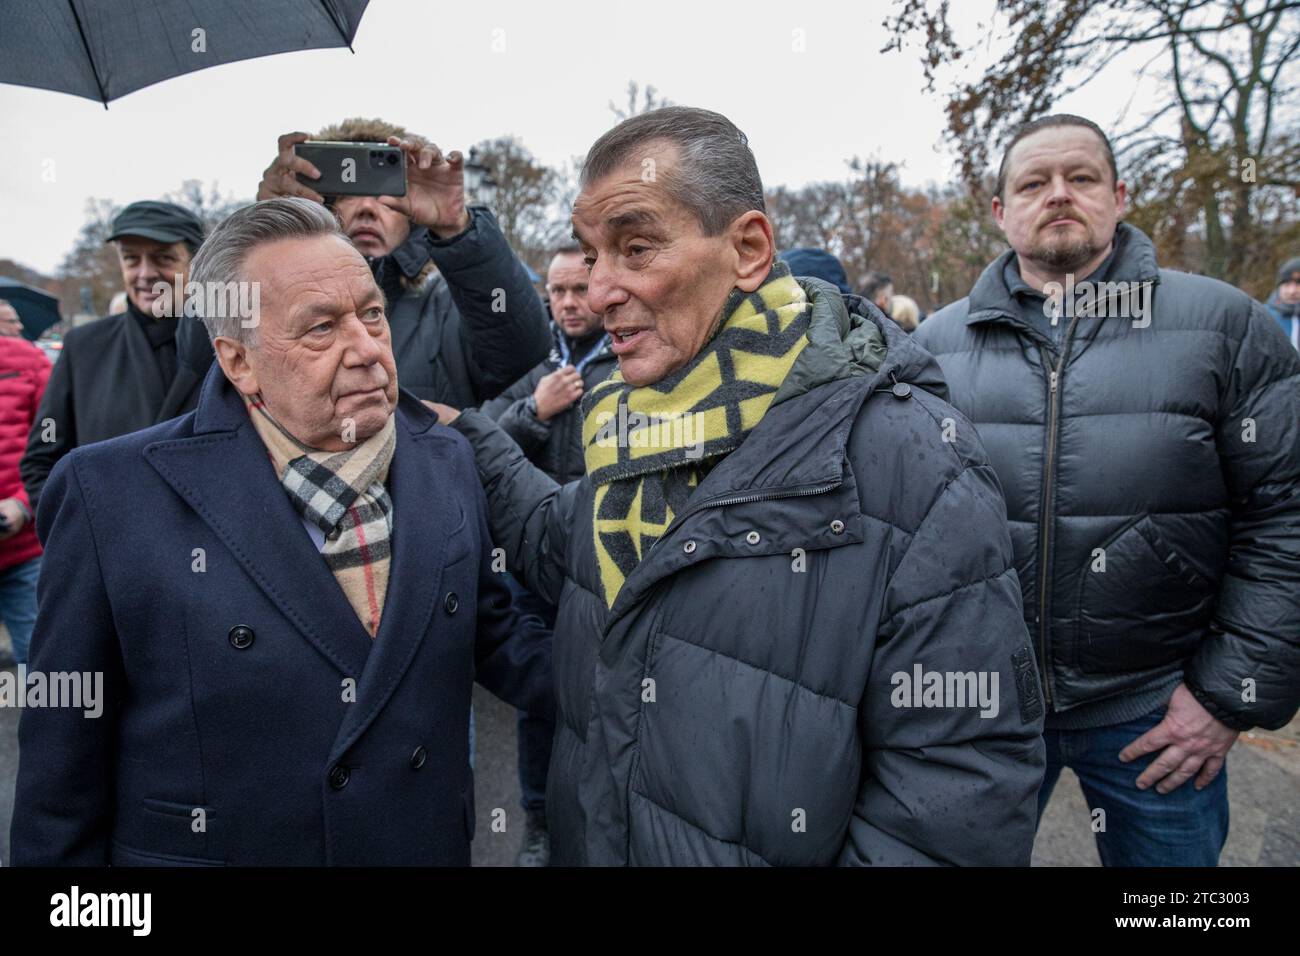 At the solidarity protest in Berlin, a significant interaction was captured between Julien Michel Friedman and Roland Kaiser, two renowned figures in their respective fields. Friedman, a notable German-French publicist, talk show host, lawyer, philosopher, and former politician, engaged in a thoughtful conversation with Kaiser, a celebrated German Schlager singer and musician. Born Ronald Keller on May 10, 1952, in West Berlin, Kaiser rose to fame with his breakthrough song 'Santa Maria' in 1980, which sold 1.2 million copies. With over 90 million records sold, he is one of the genre's most su Stock Photo